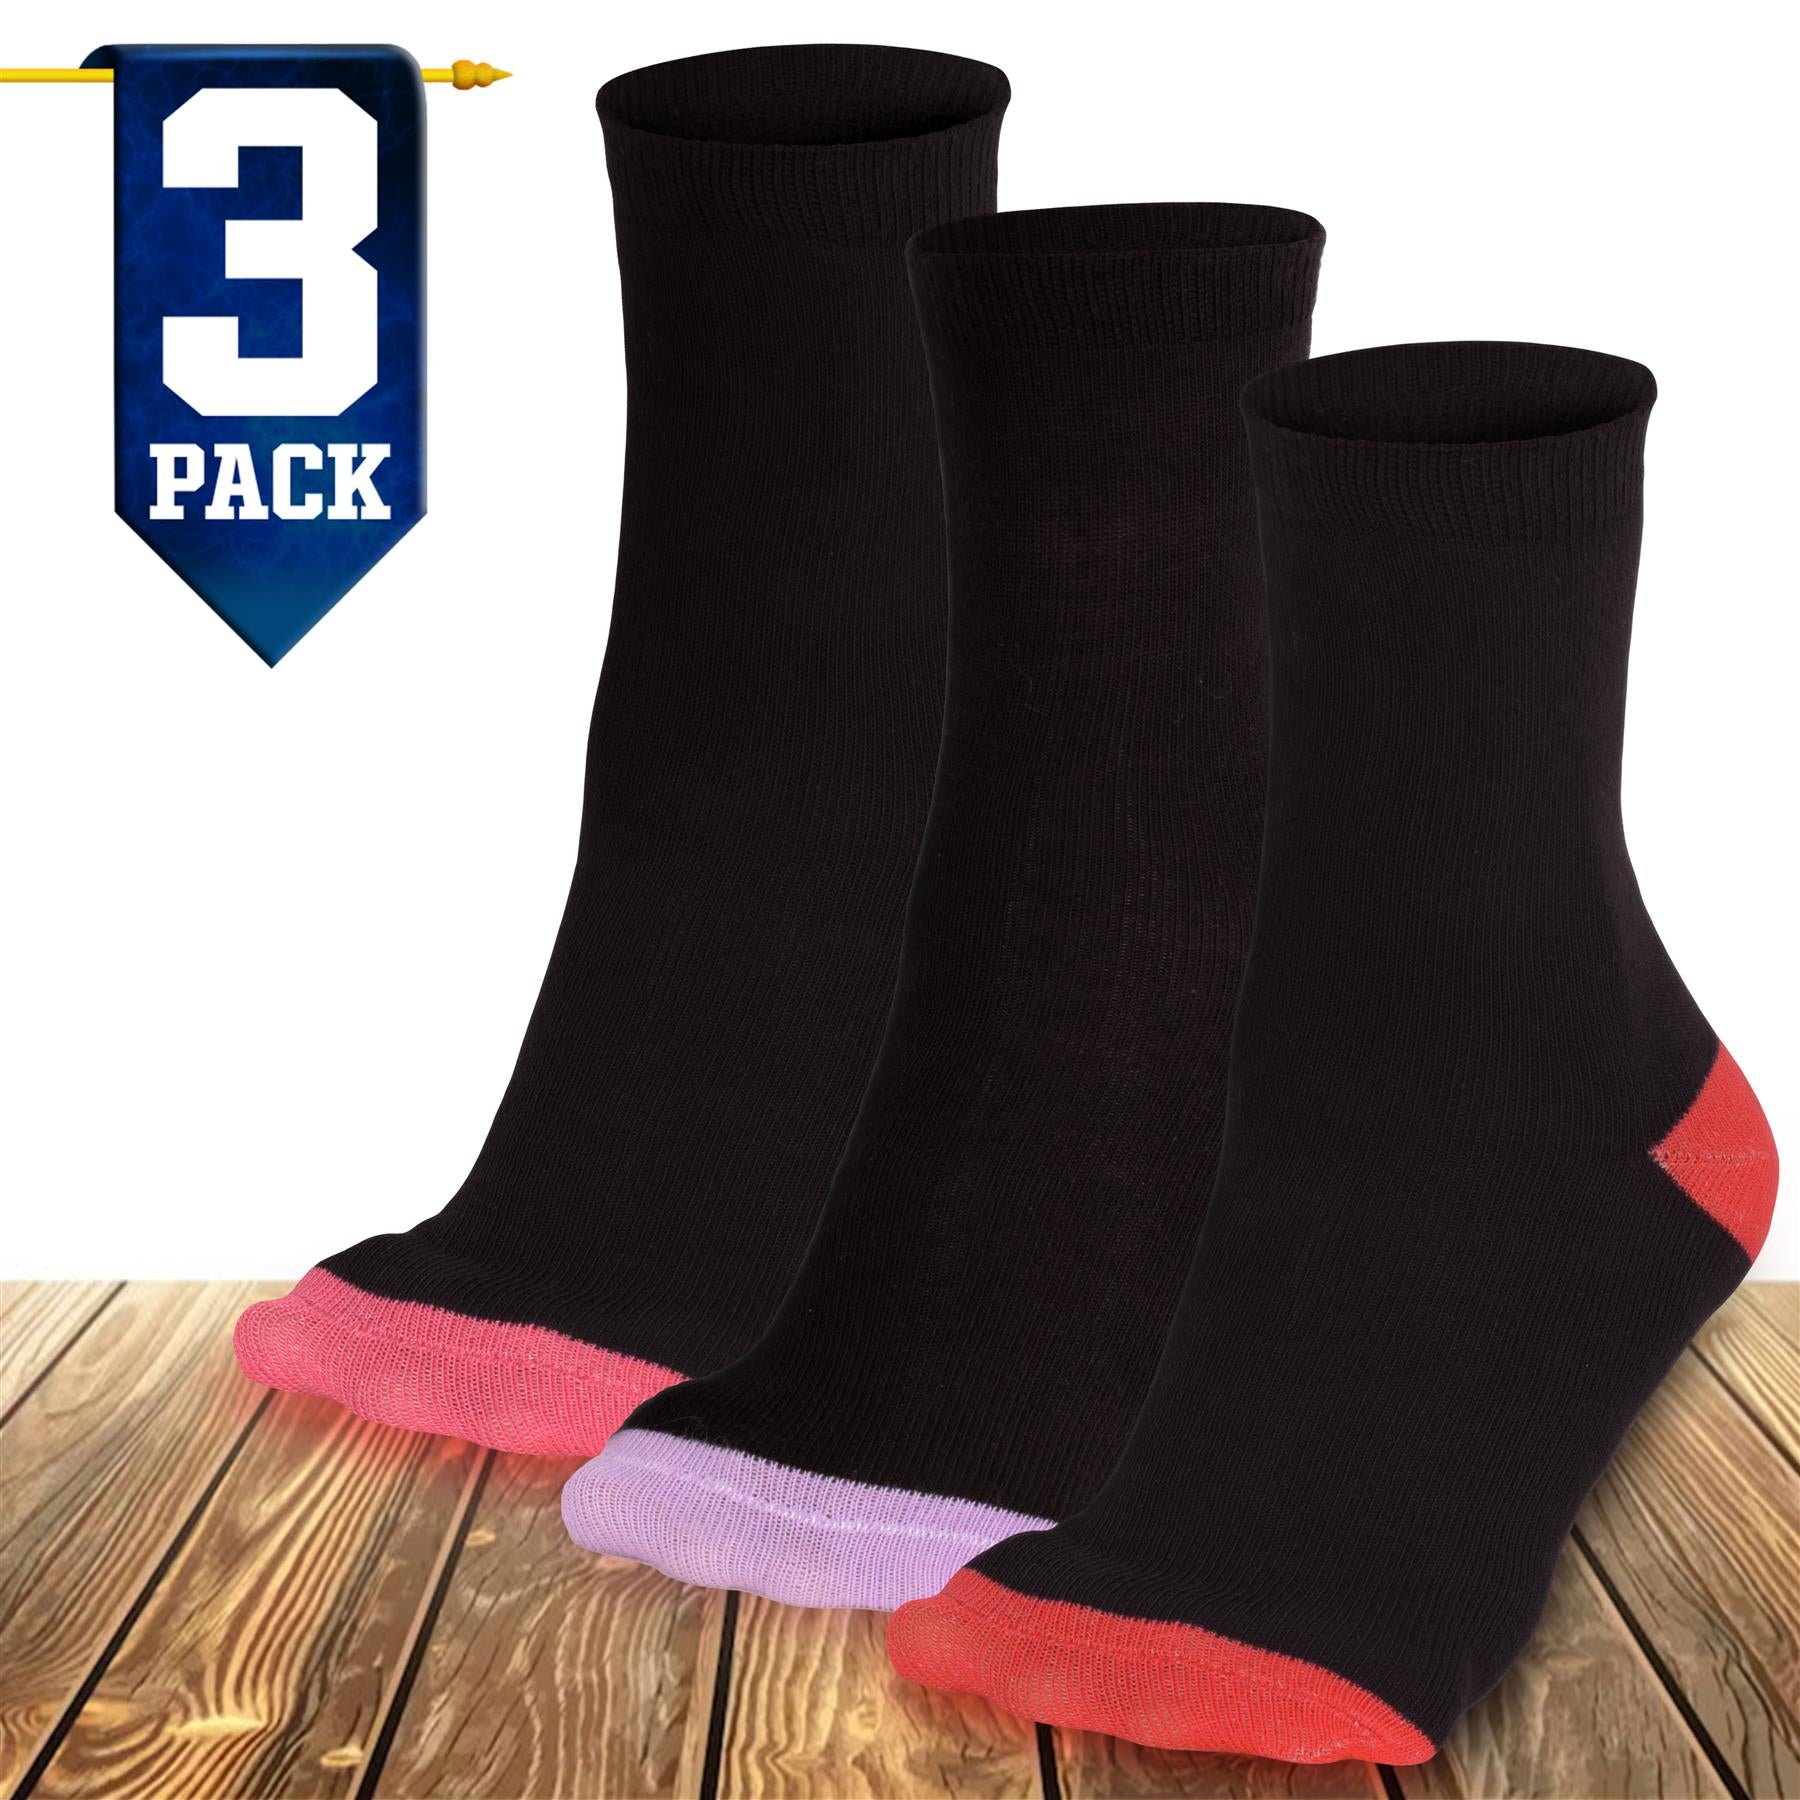 Ladies Cotton Rich Plain Ankle Socks Pack Of 5 and 3 Luxurious Ladies Socks